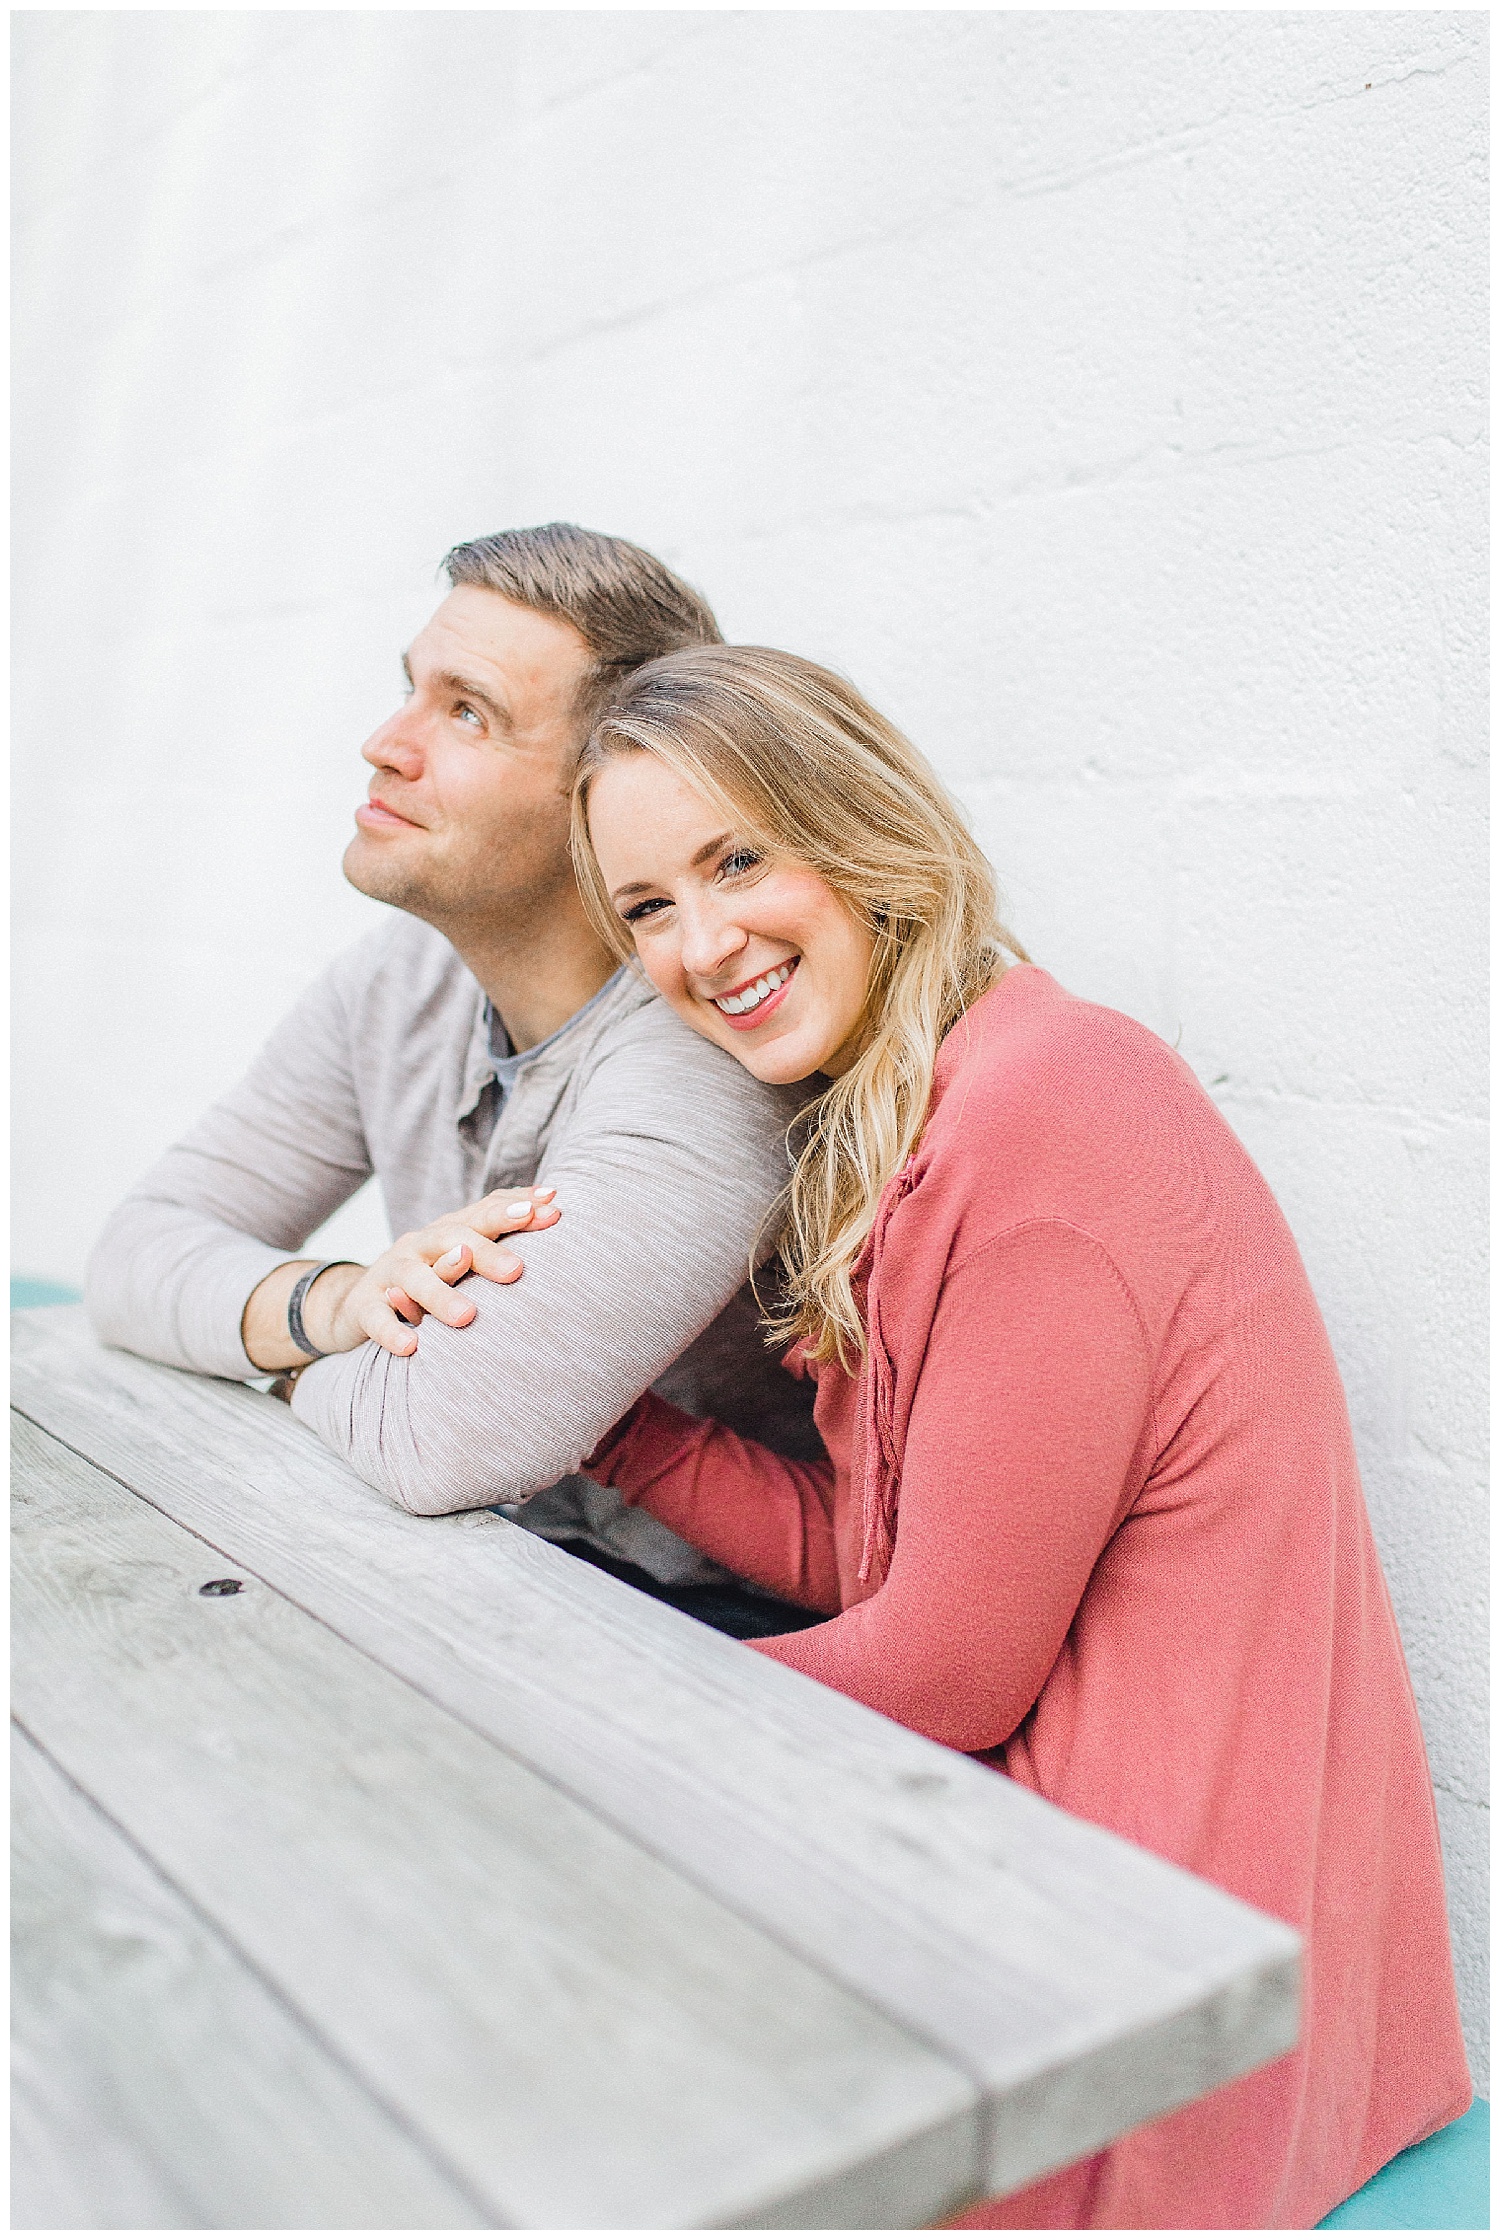 ERC_0847_Downtown Nashville Engagement Session at Barista Parlor | Emma Rose Company Wedding Photographer | Outfit Inspiration for Engagement Session | Kindred Light and Airy Photographer.jpg